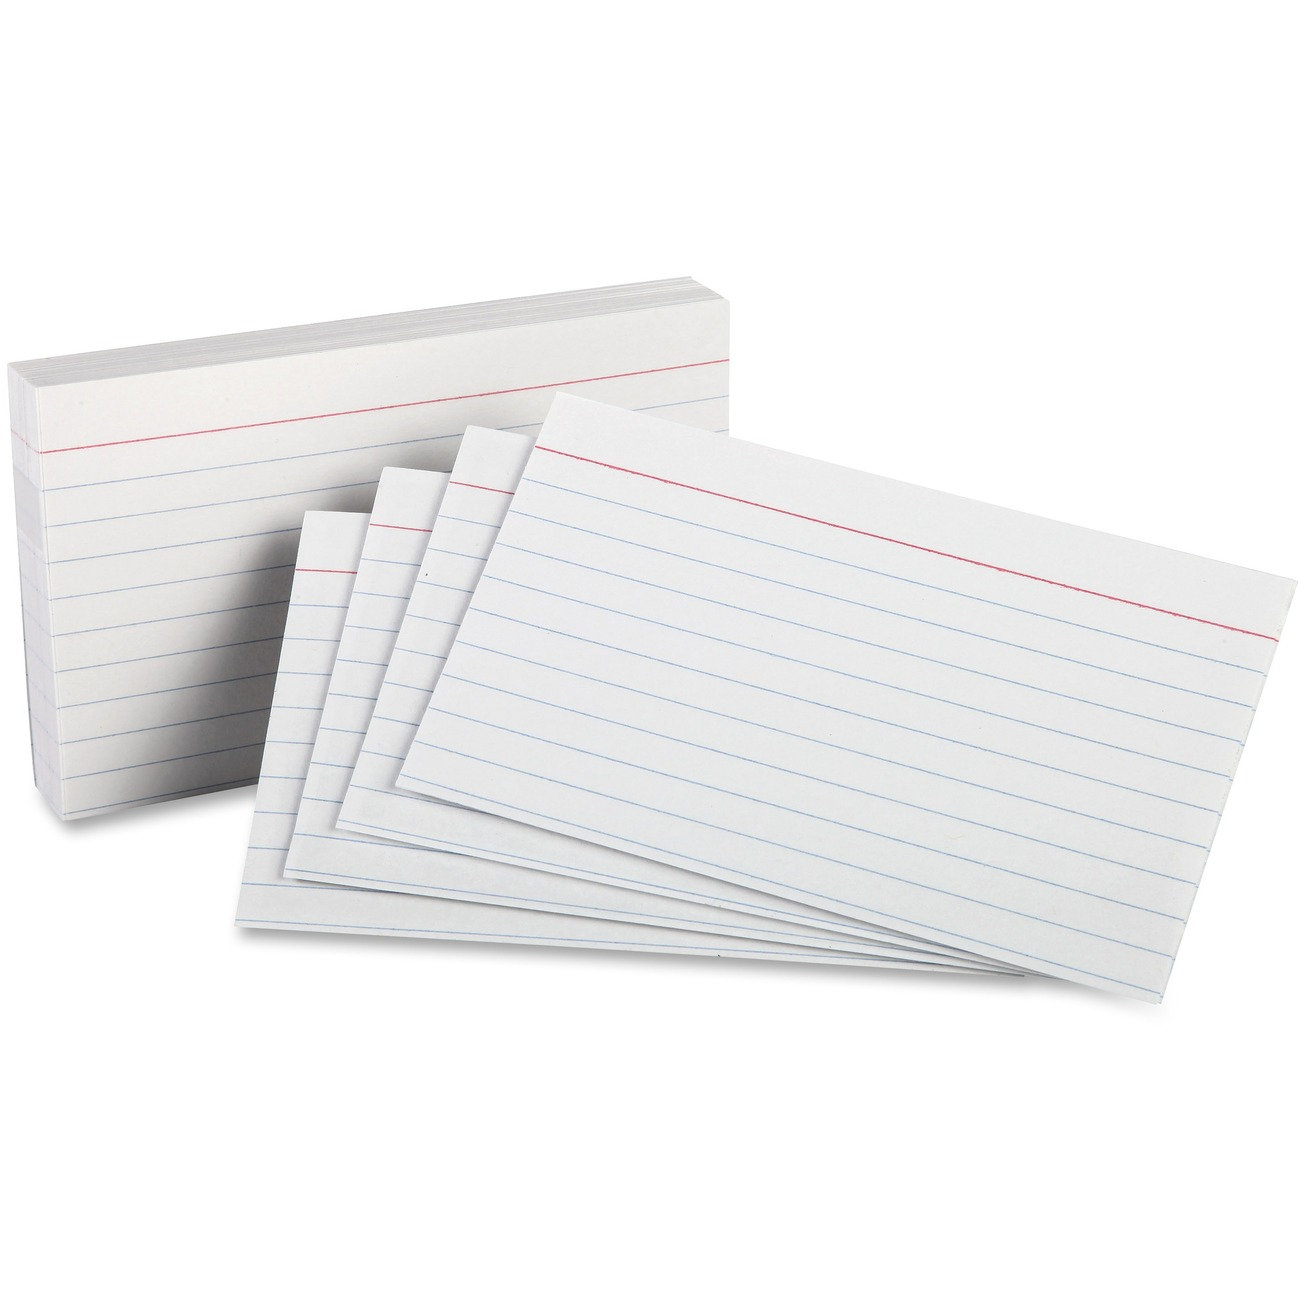 Kamloops Office Systems :: Office Supplies :: Paper & Pads For 5 By 8 Index Card Template